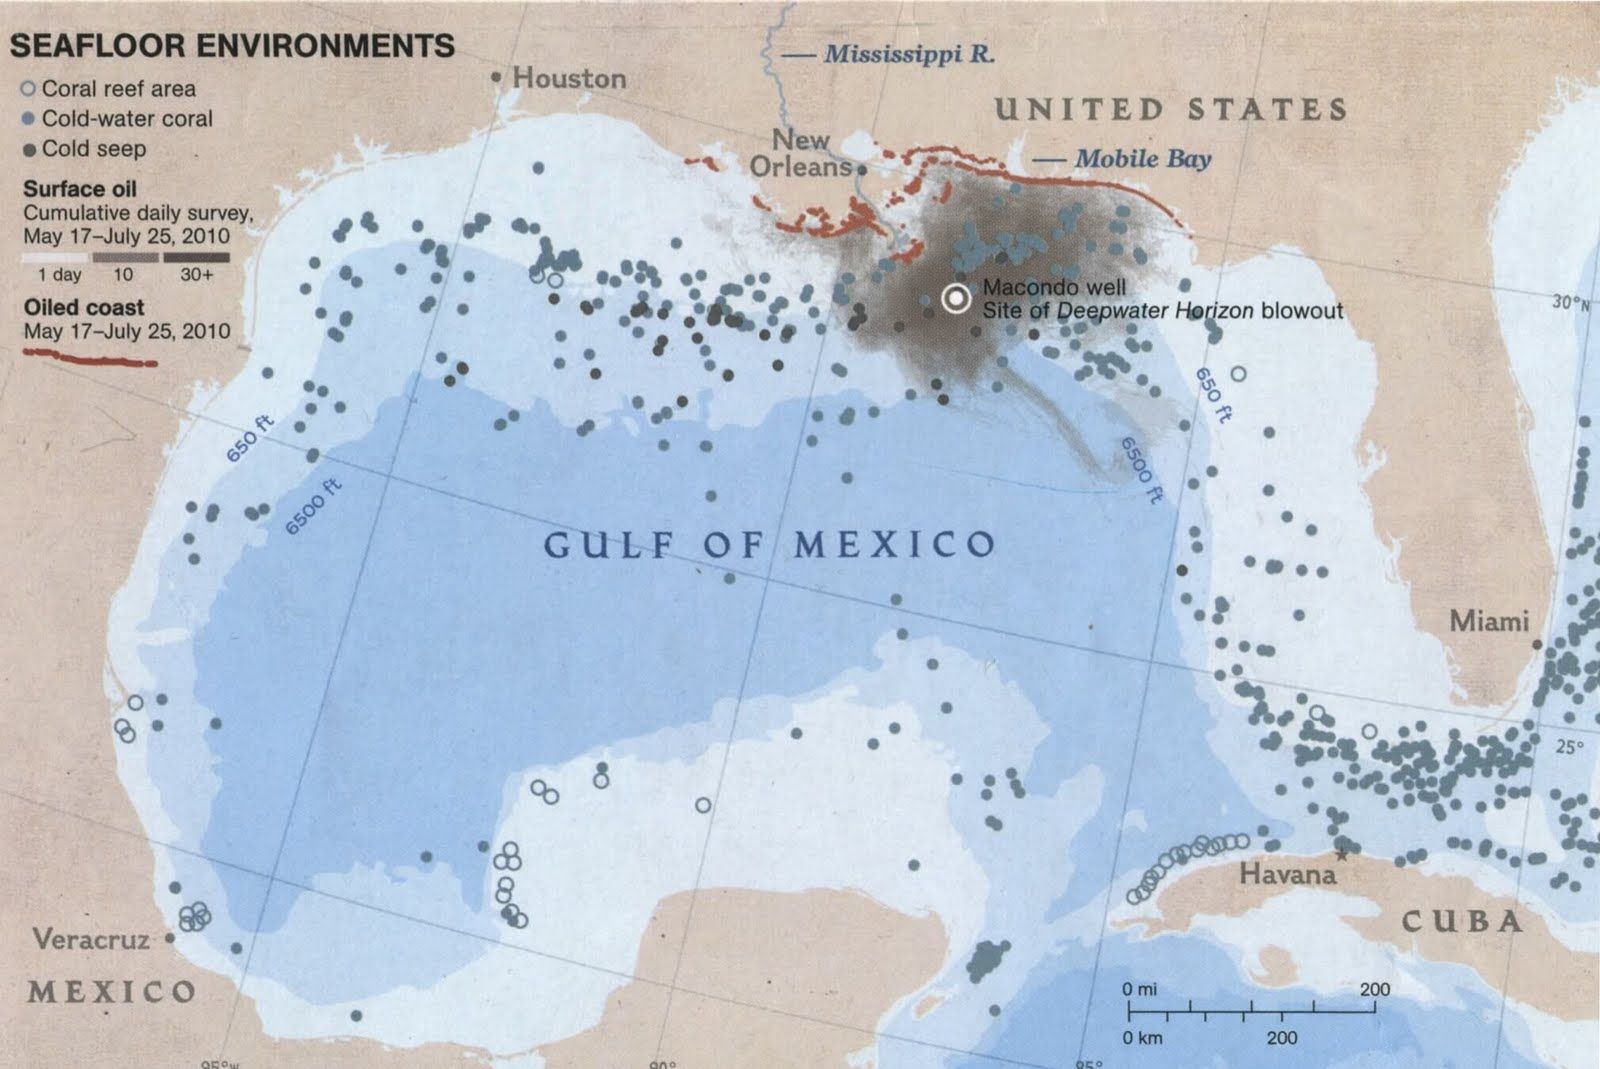 Map illustrating the initial dispersion of the Deepwater Horizon oil spill in the Gulf of Mexico